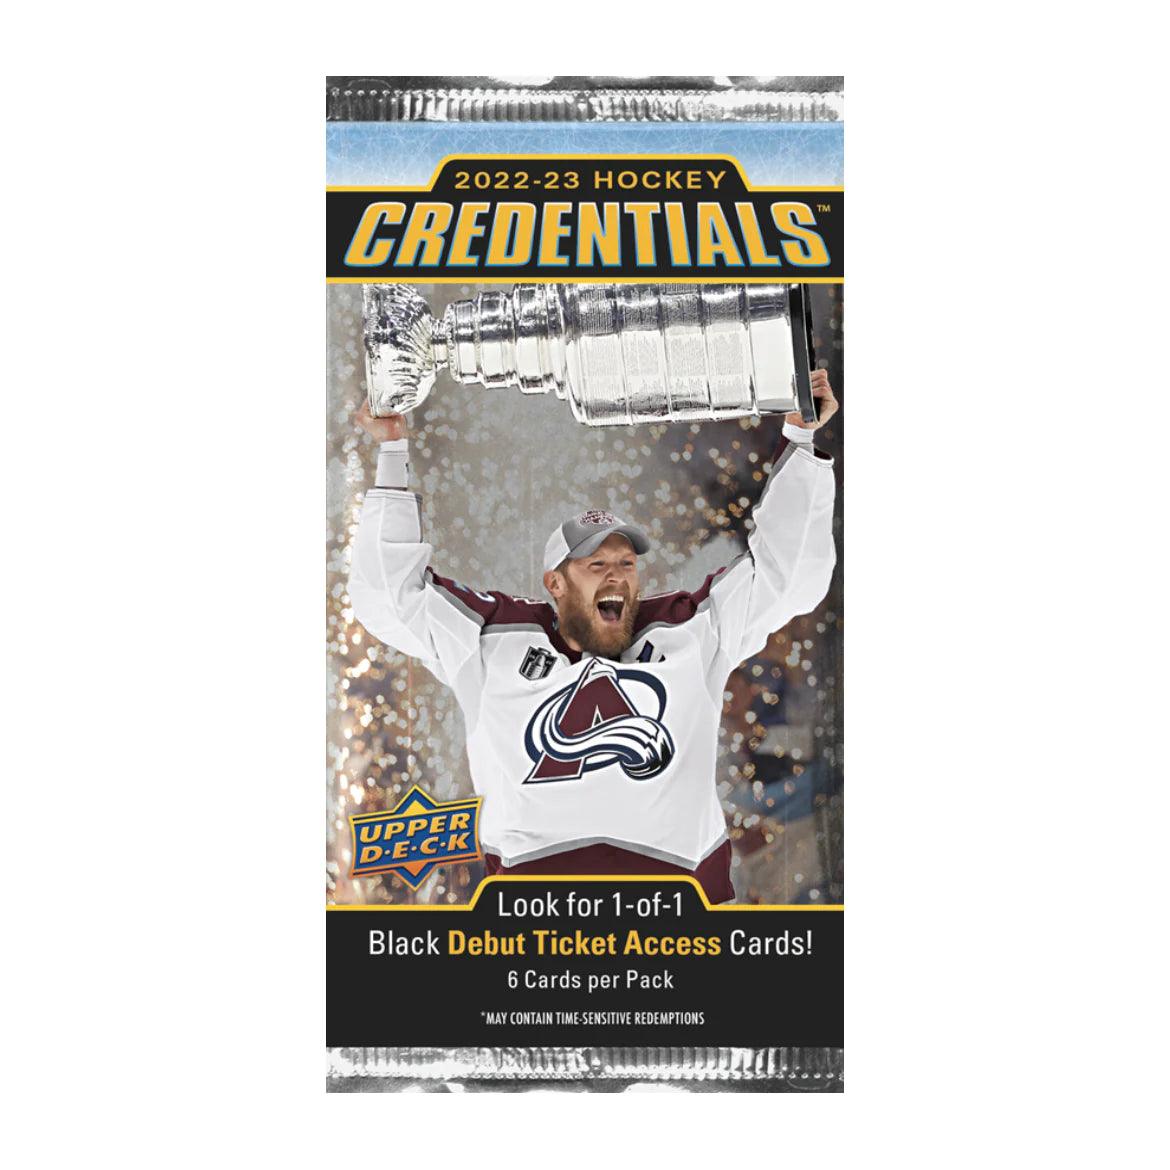 Hockey - 2022/23 - Upper Deck Credentials - Hobby Pack (6 Cards) - Hobby Champion Inc